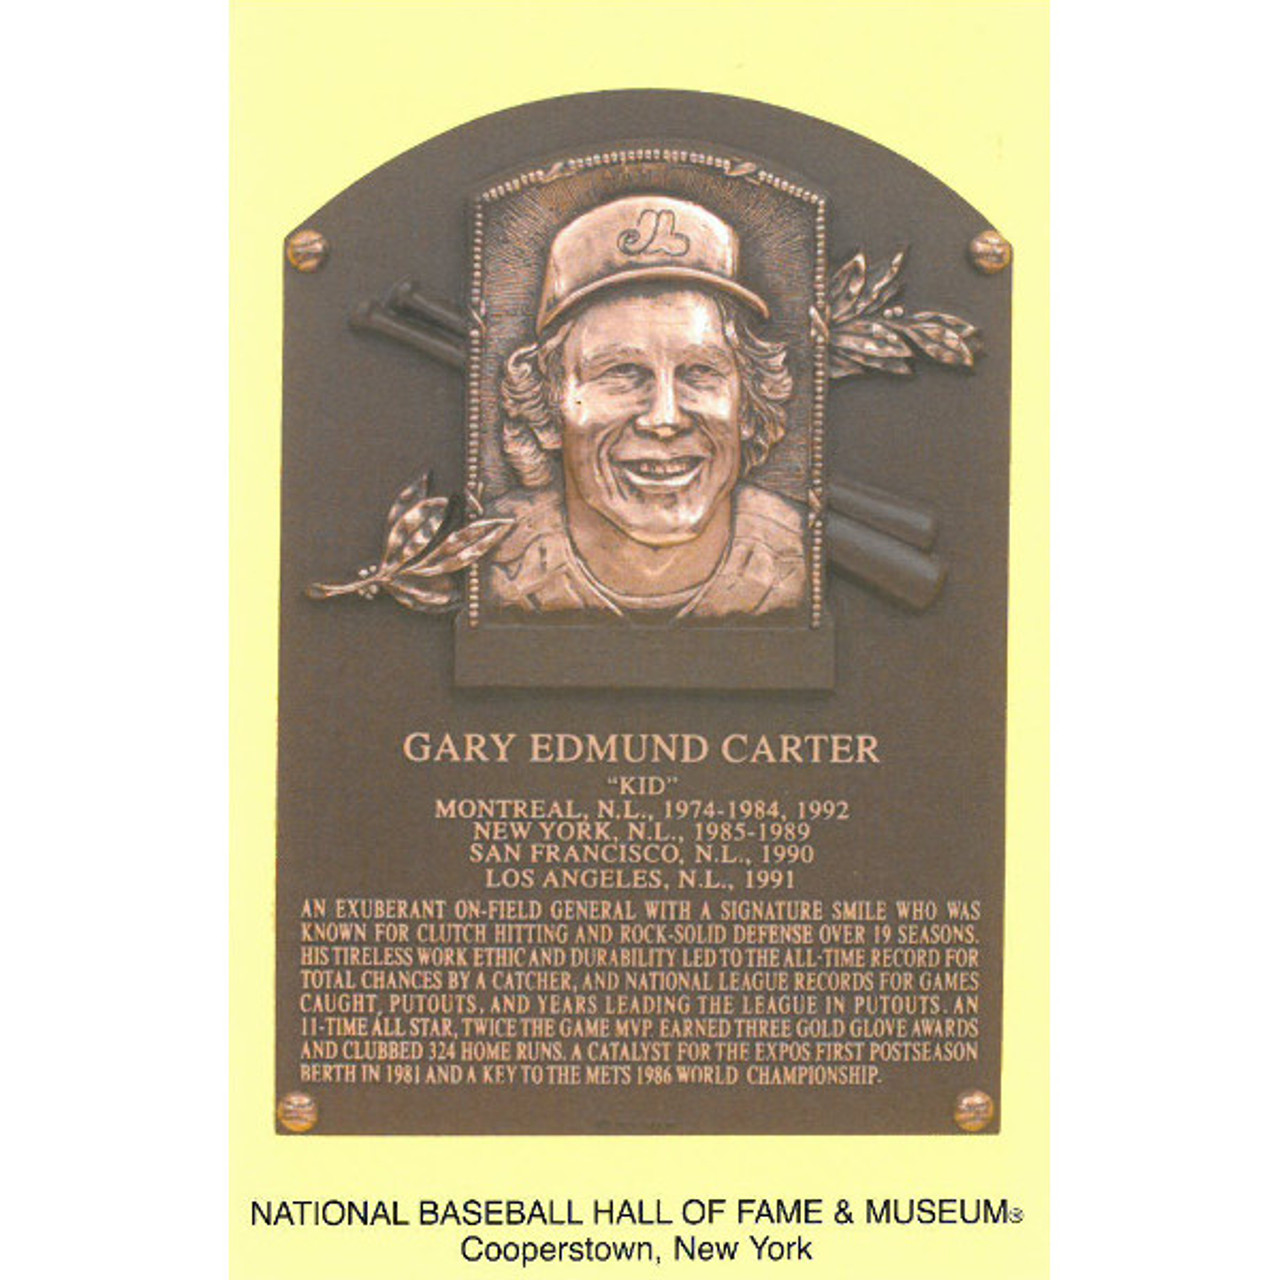 Eddie Murray & Gary Carter Signed National Baseball Hall of Fame And Museum  2003 Yearbook Inscribed HOF 2003 (Mead Chasky Hologram & Carter Hologram)